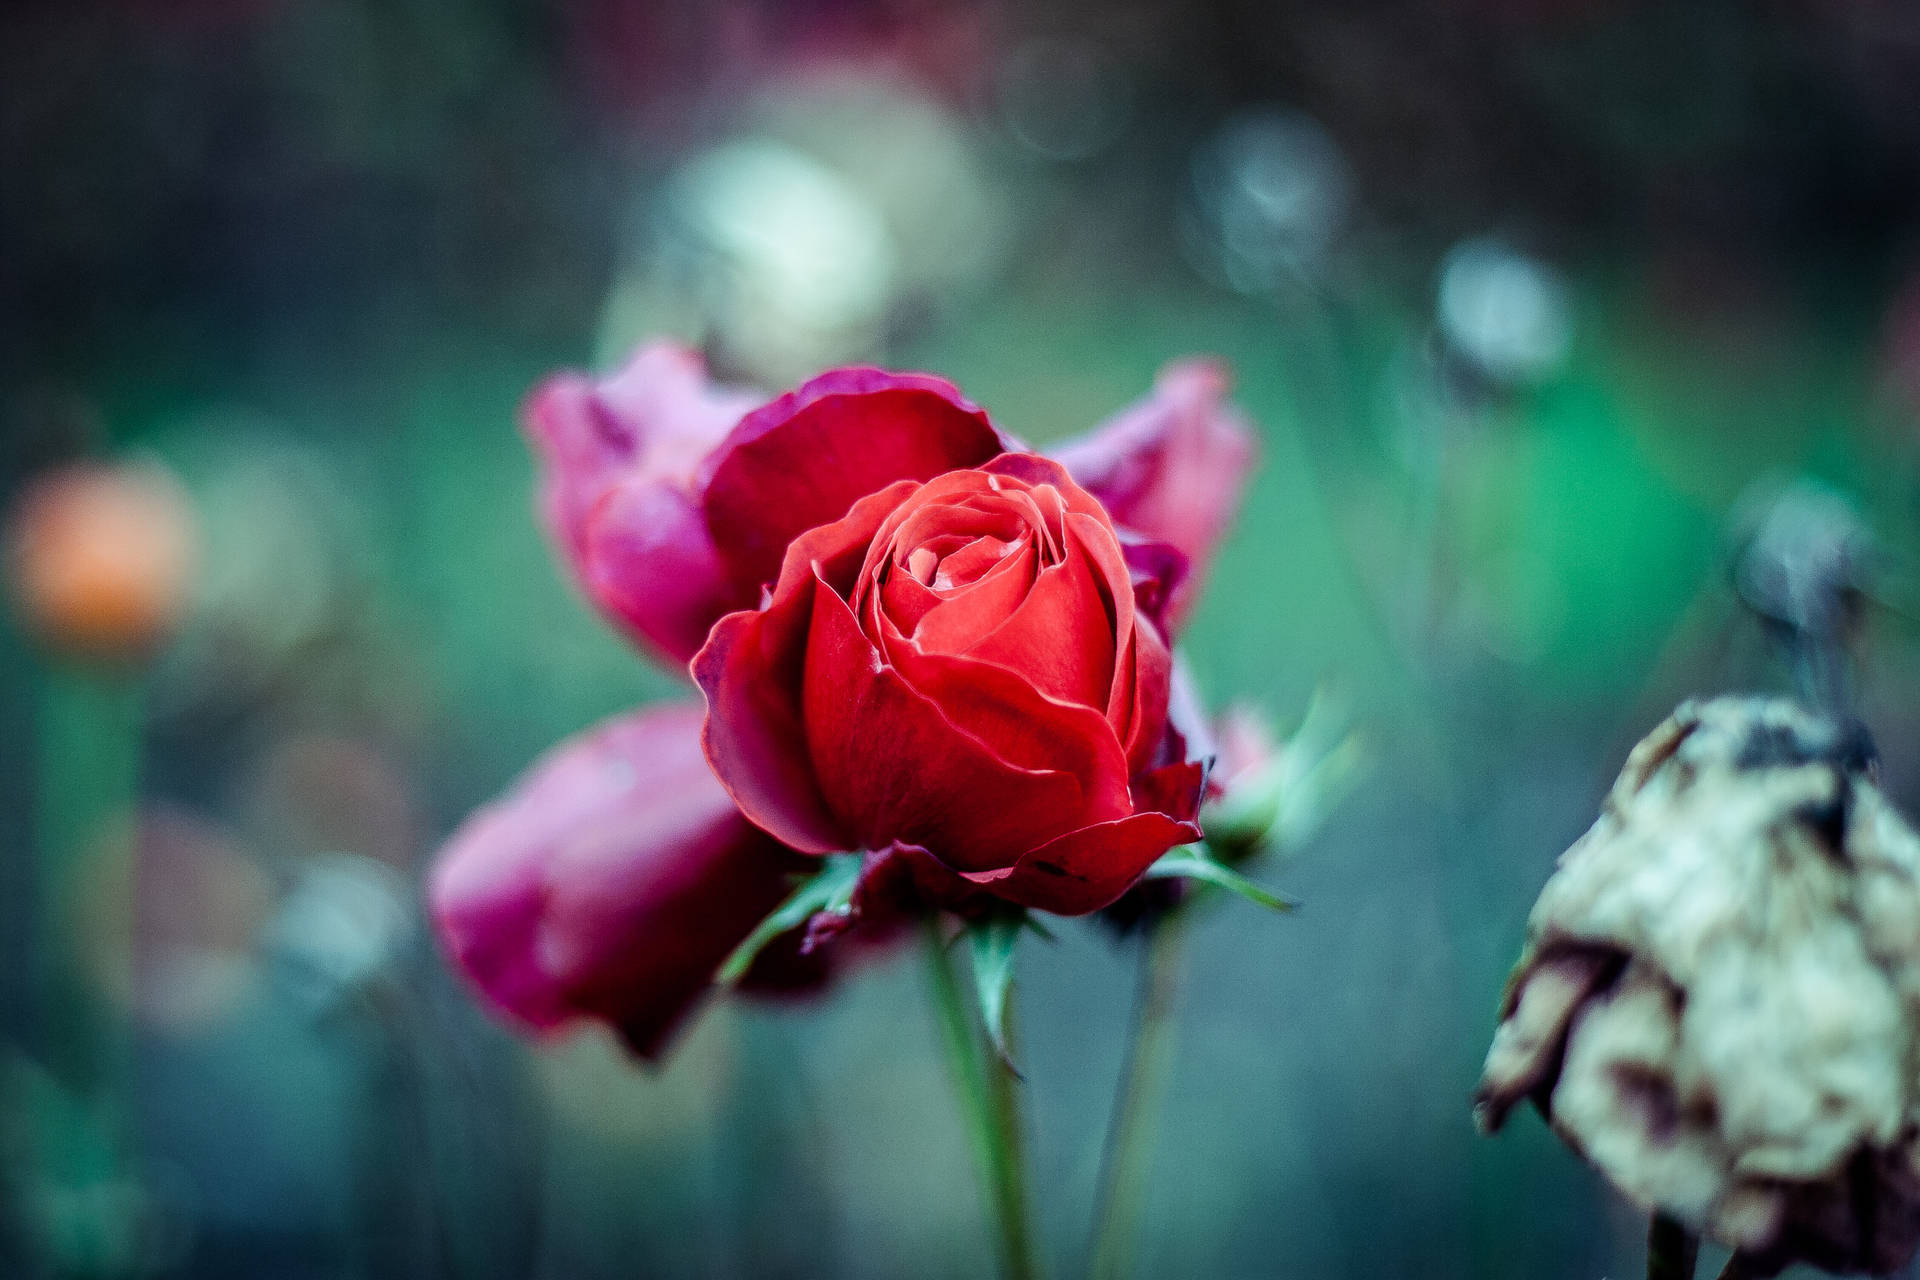 A Single Red Rose With Green Foliage Background